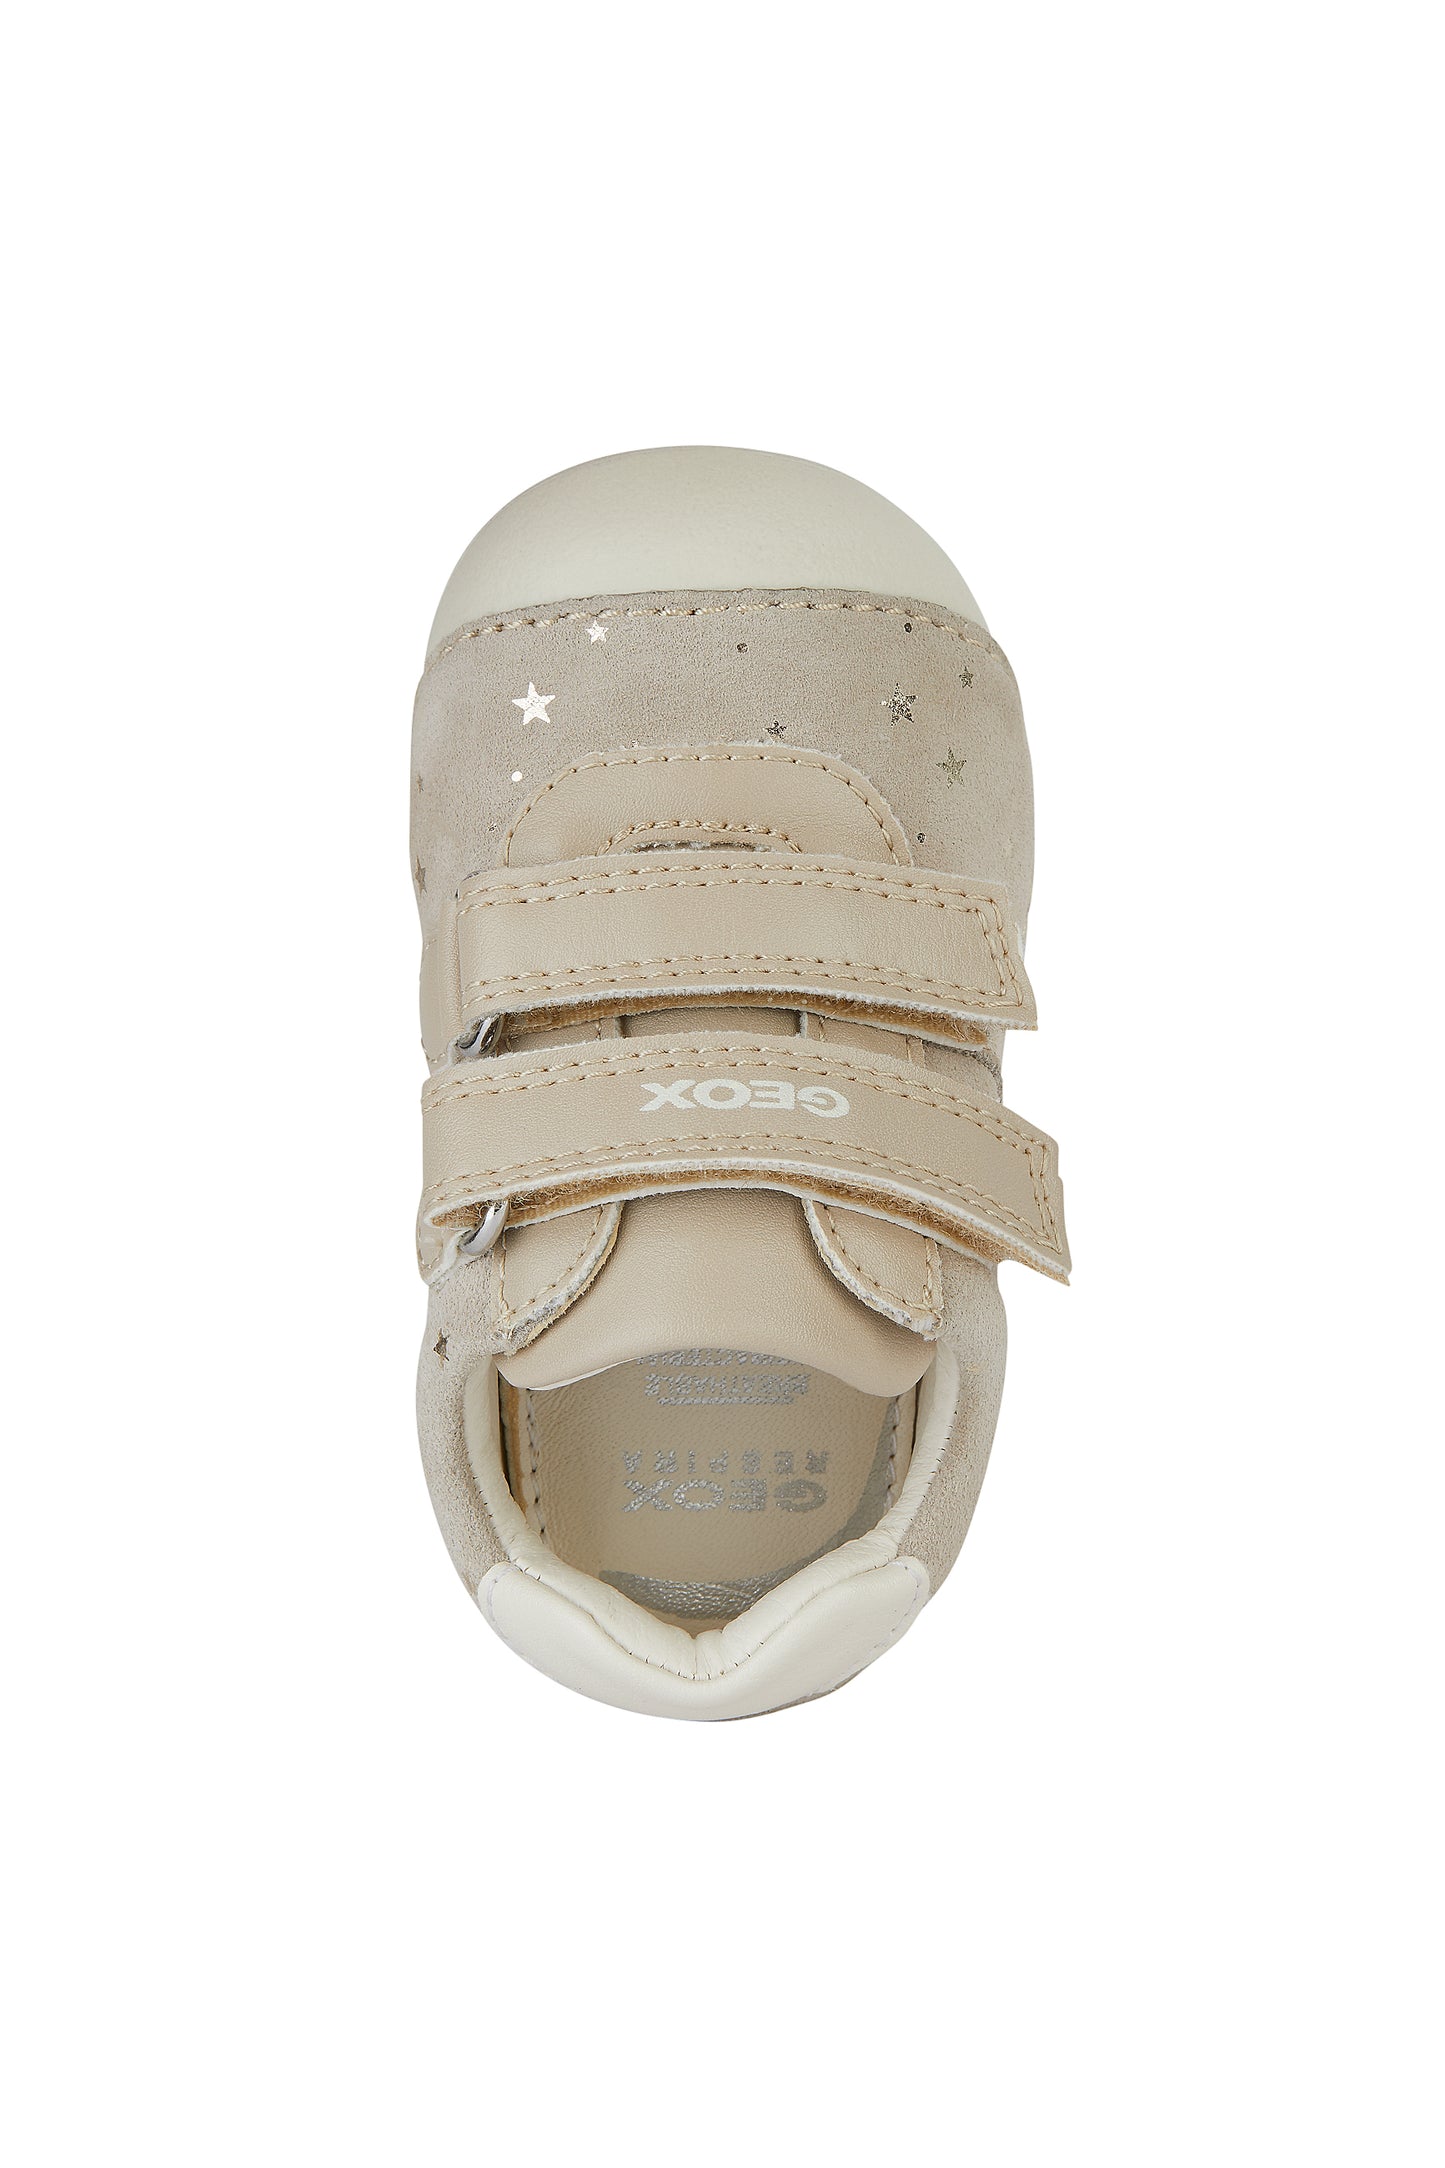 A girls pre walker by Geox, style B Tutim Girl, with toe bumper ,in beige suede with star detail and double velcro fastening. View from above.